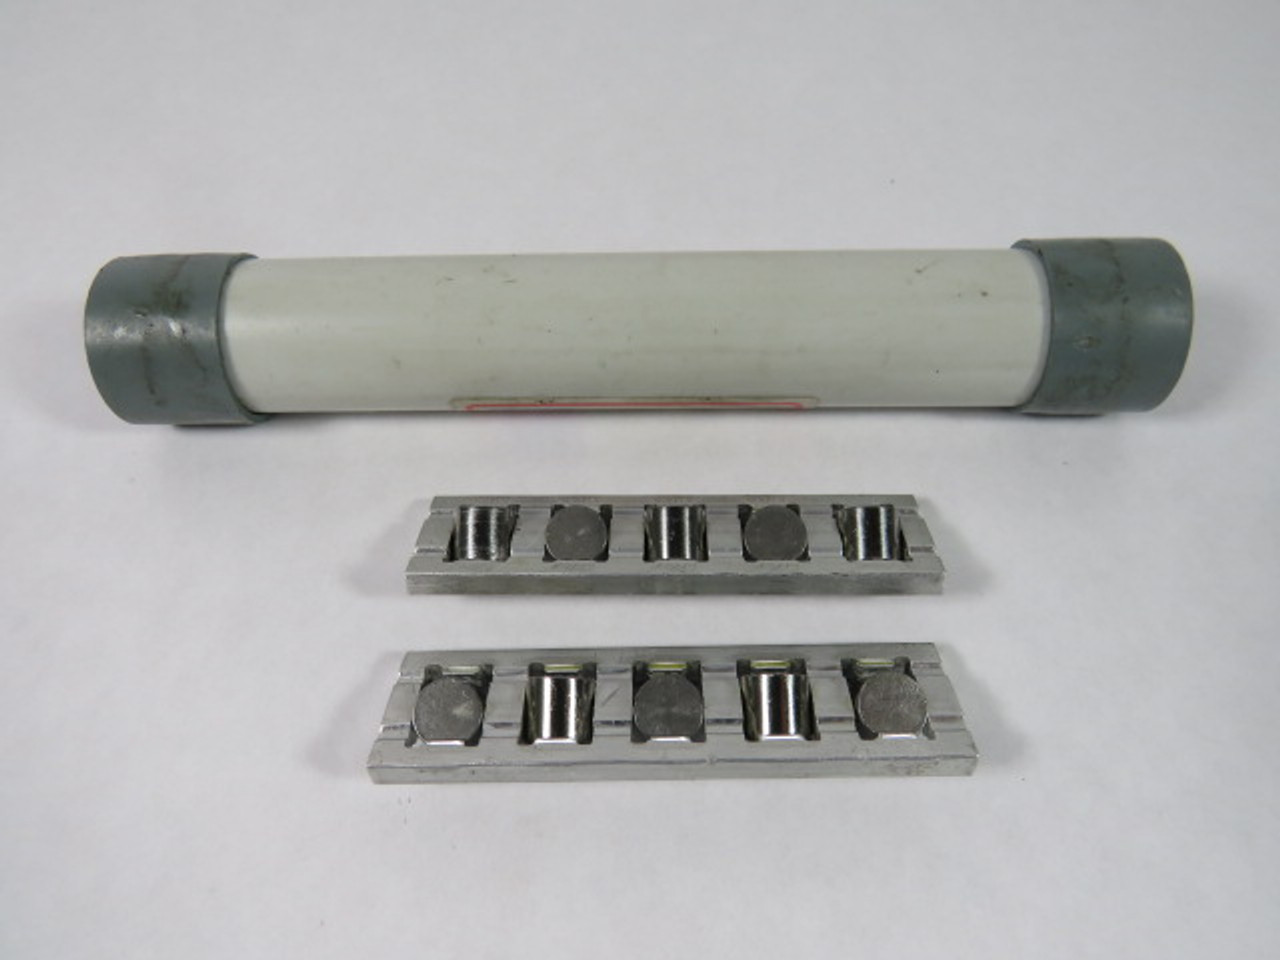 SKF LWAL9x5 Cross Rollers in Plastic Cage 2Pcs USED